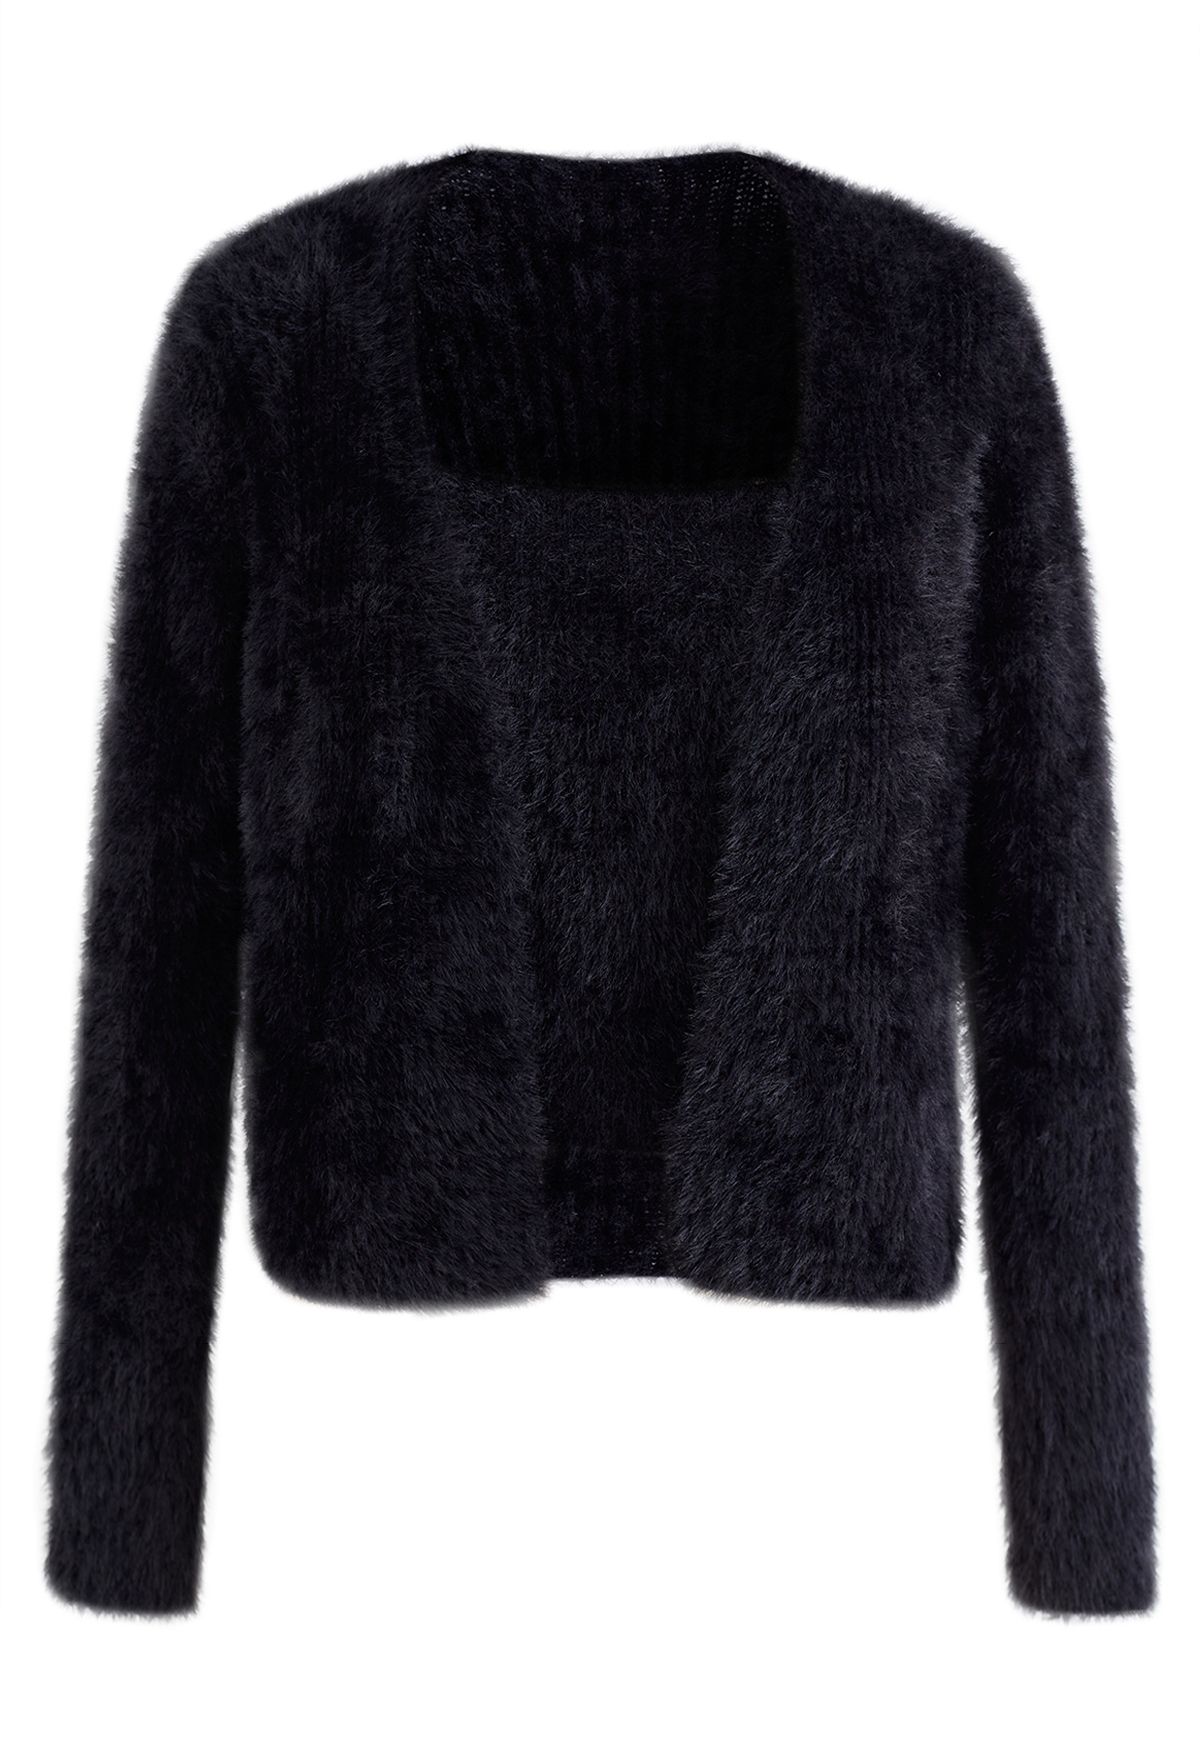 Extra Soft Fuzzy Knit Cami Top and Cardigan Set in Black